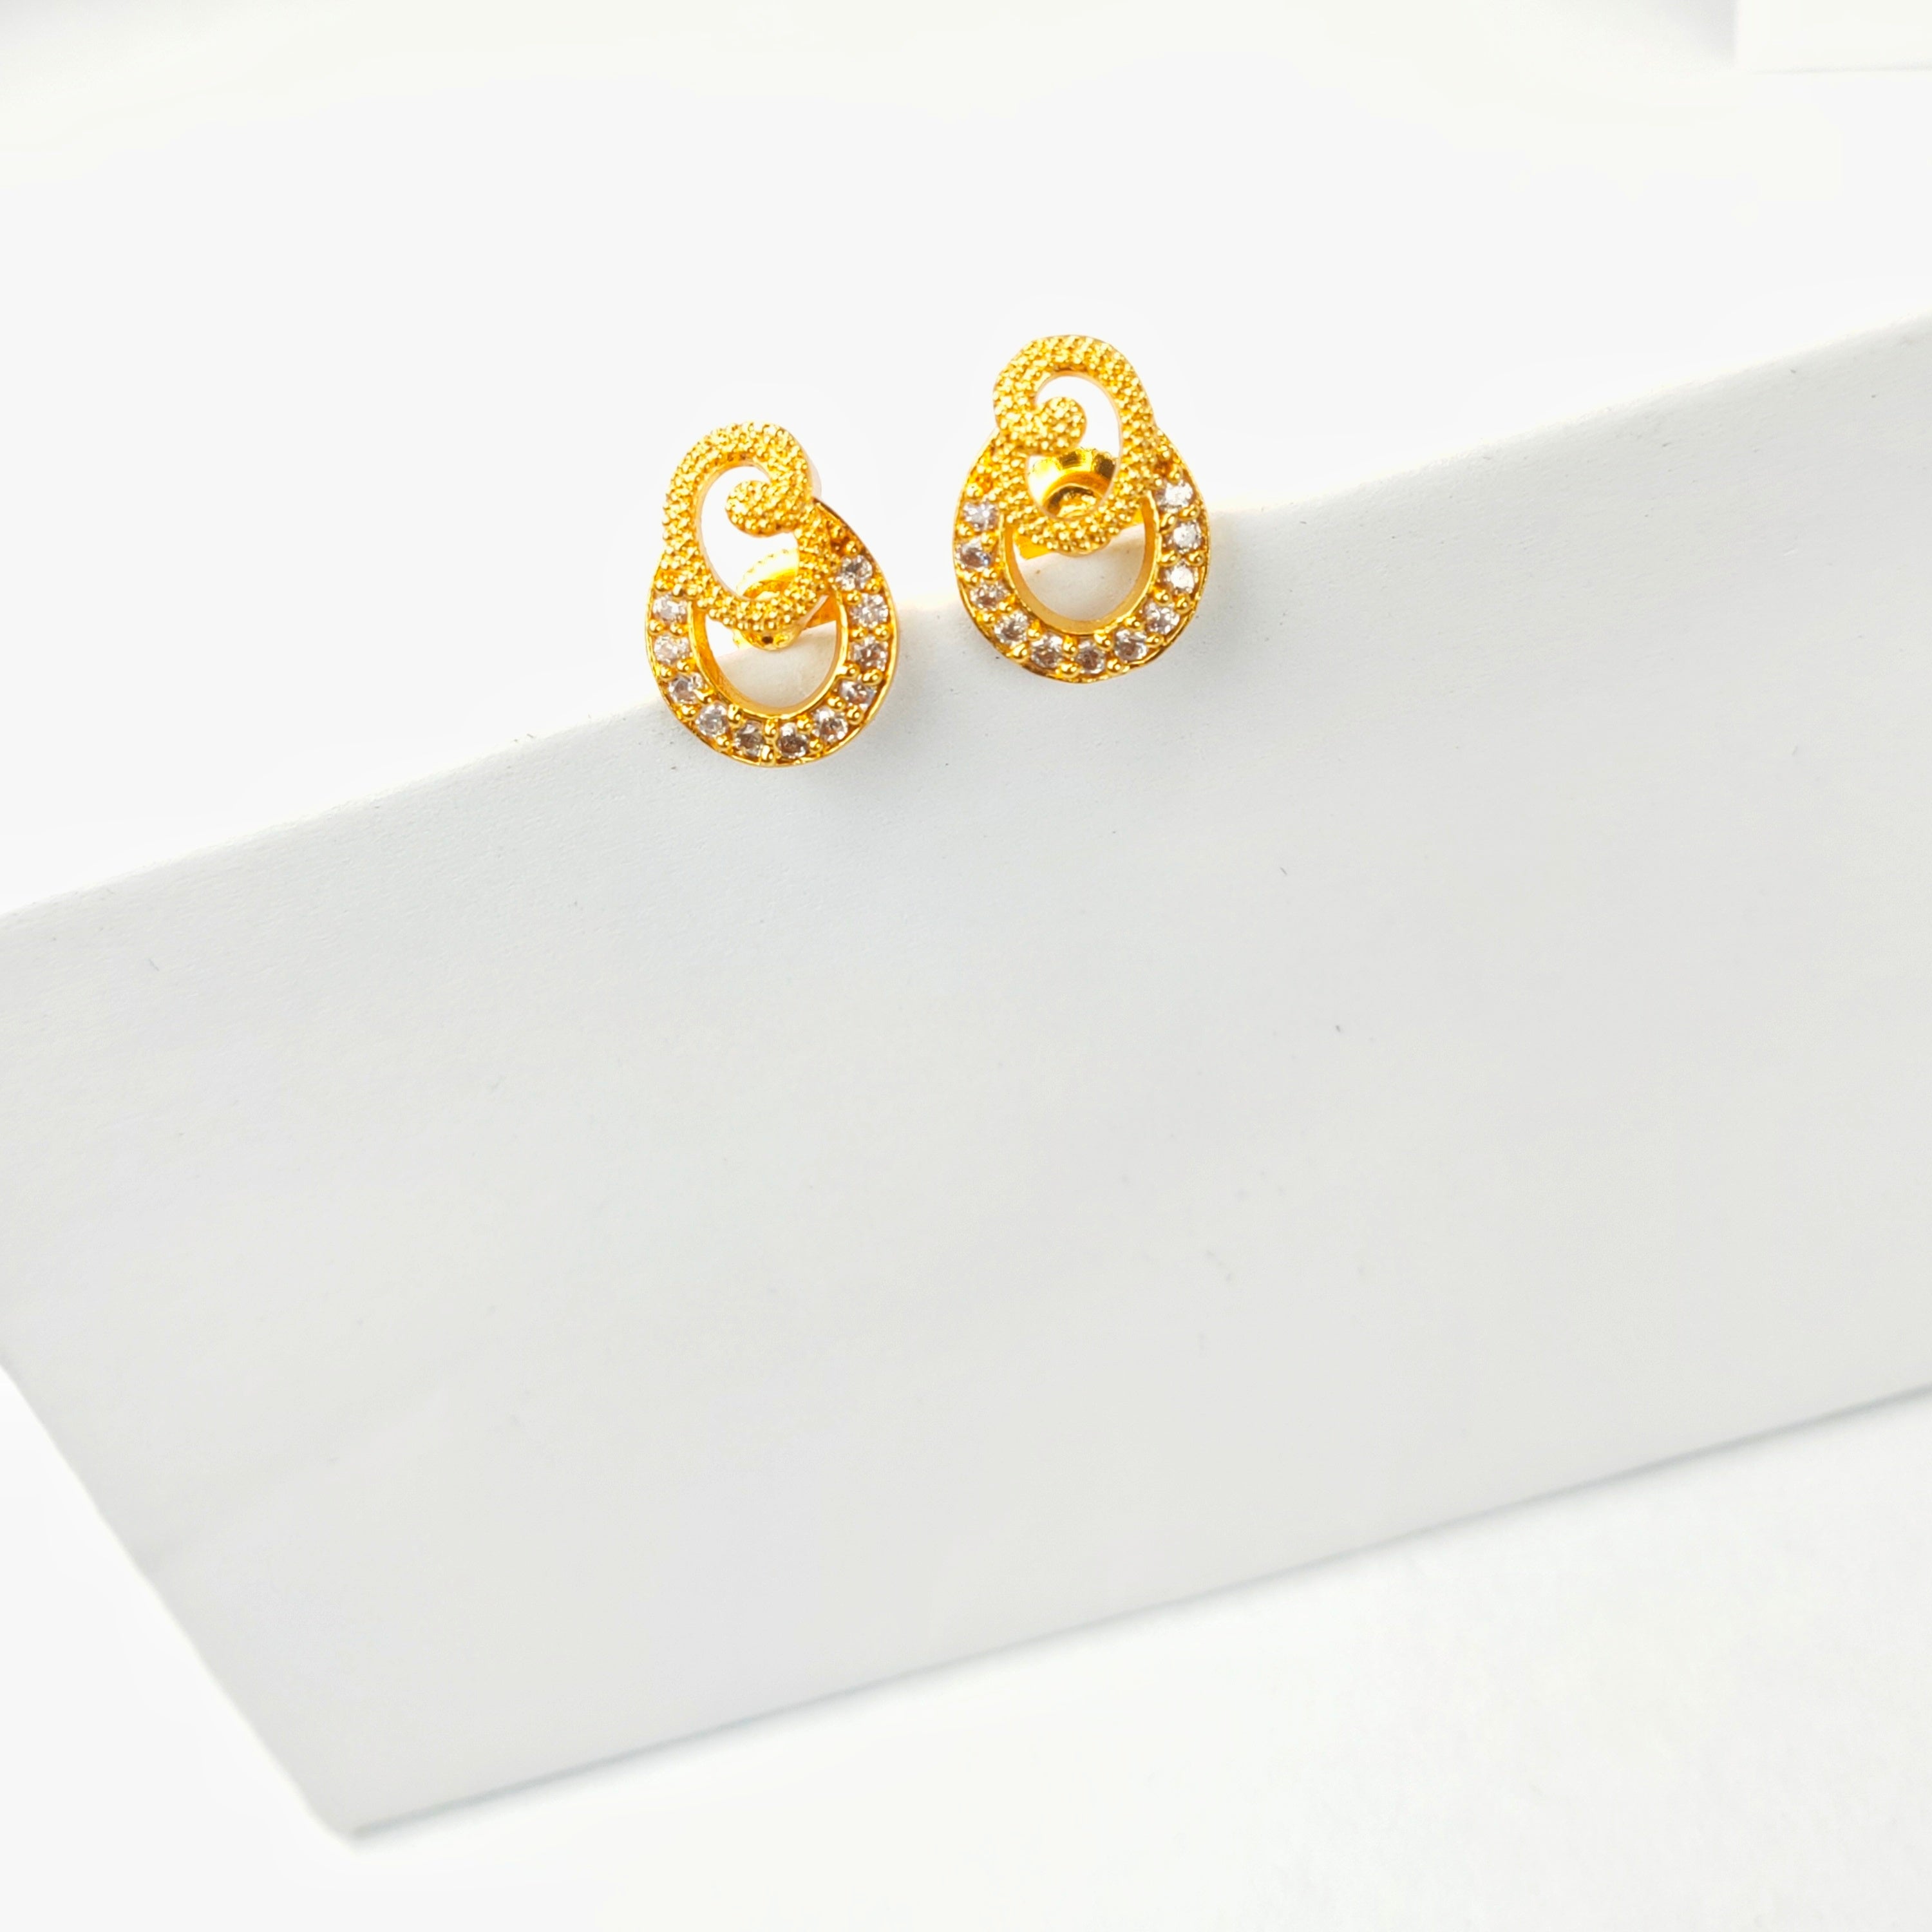 Exclusive 1grm Gold Earrings Collection #1gram #gold #earrings #jumkas |  Gold earrings designs, Earrings collection, Earrings